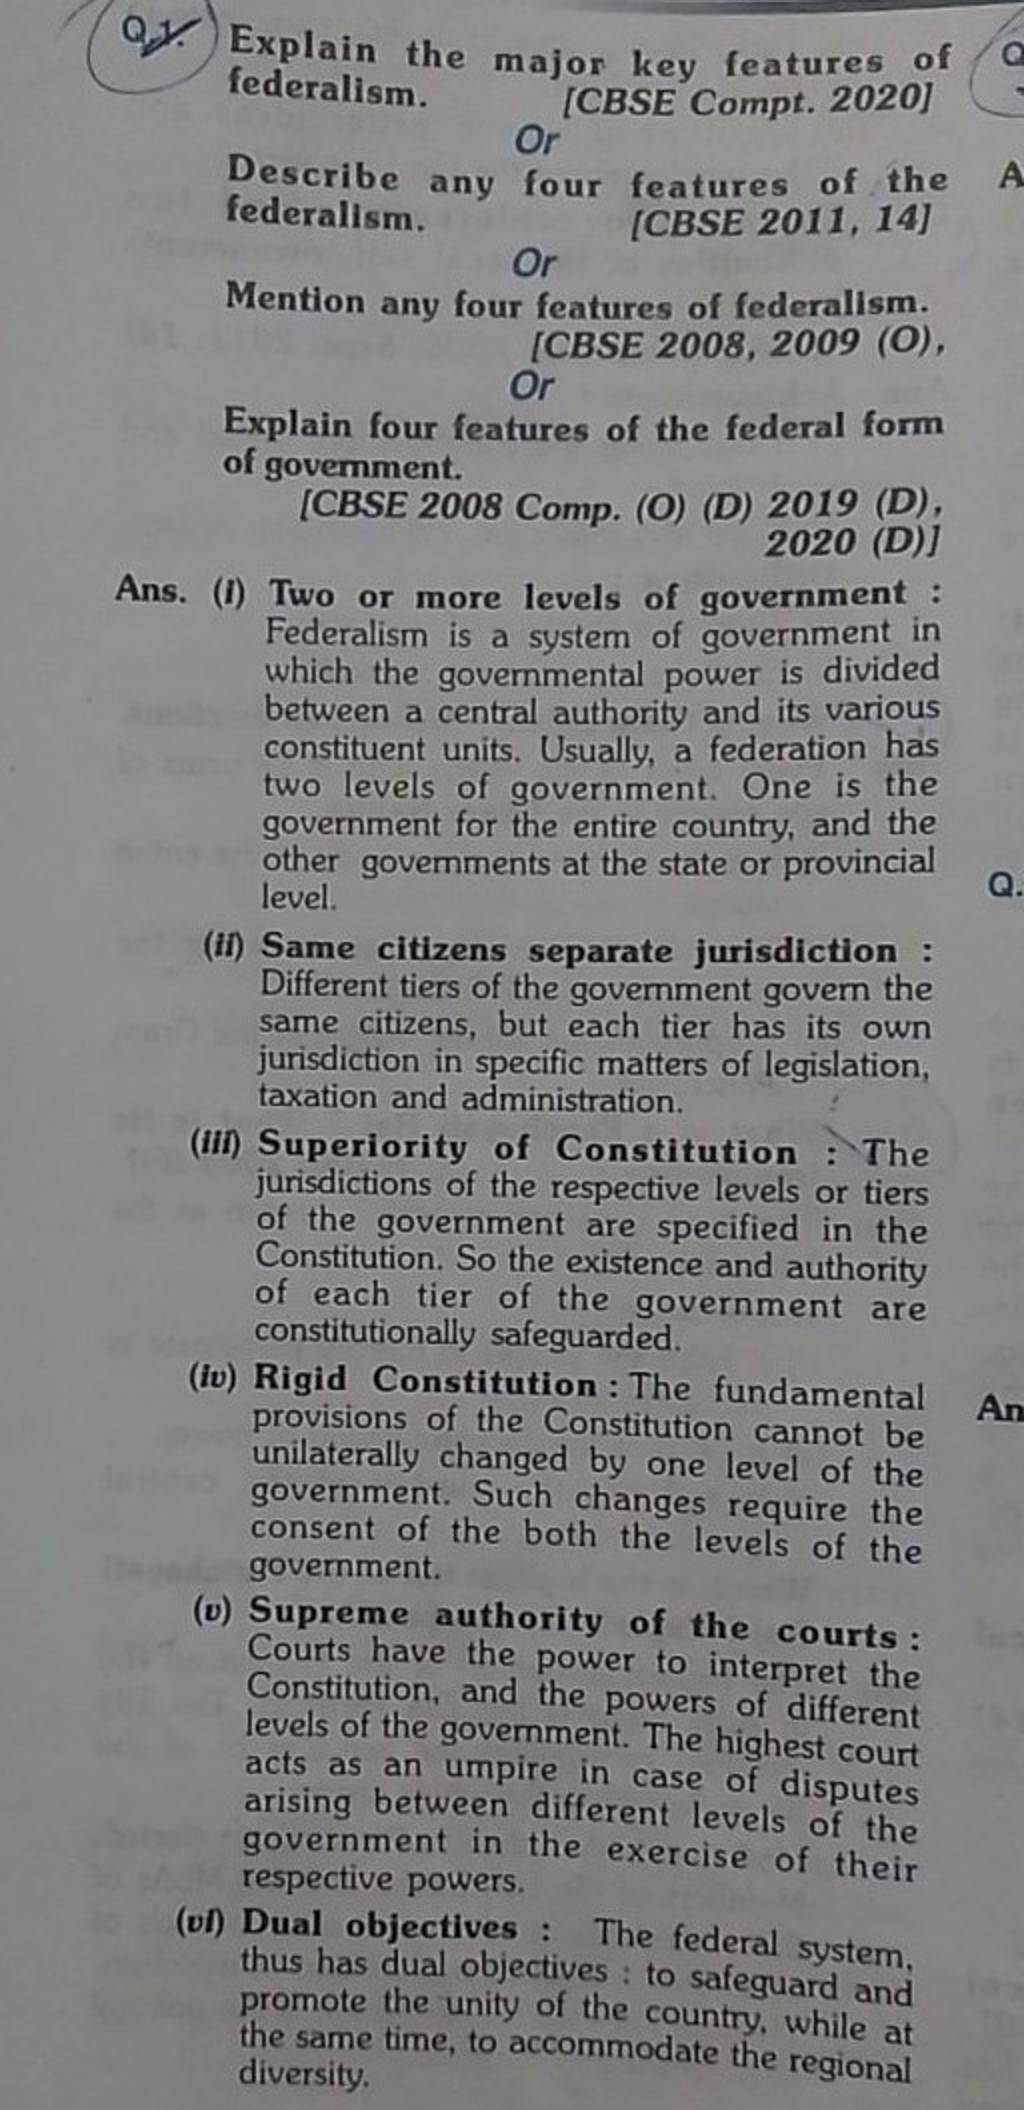 explain-the-major-key-features-of-federalism-cbse-compt-2020-describe